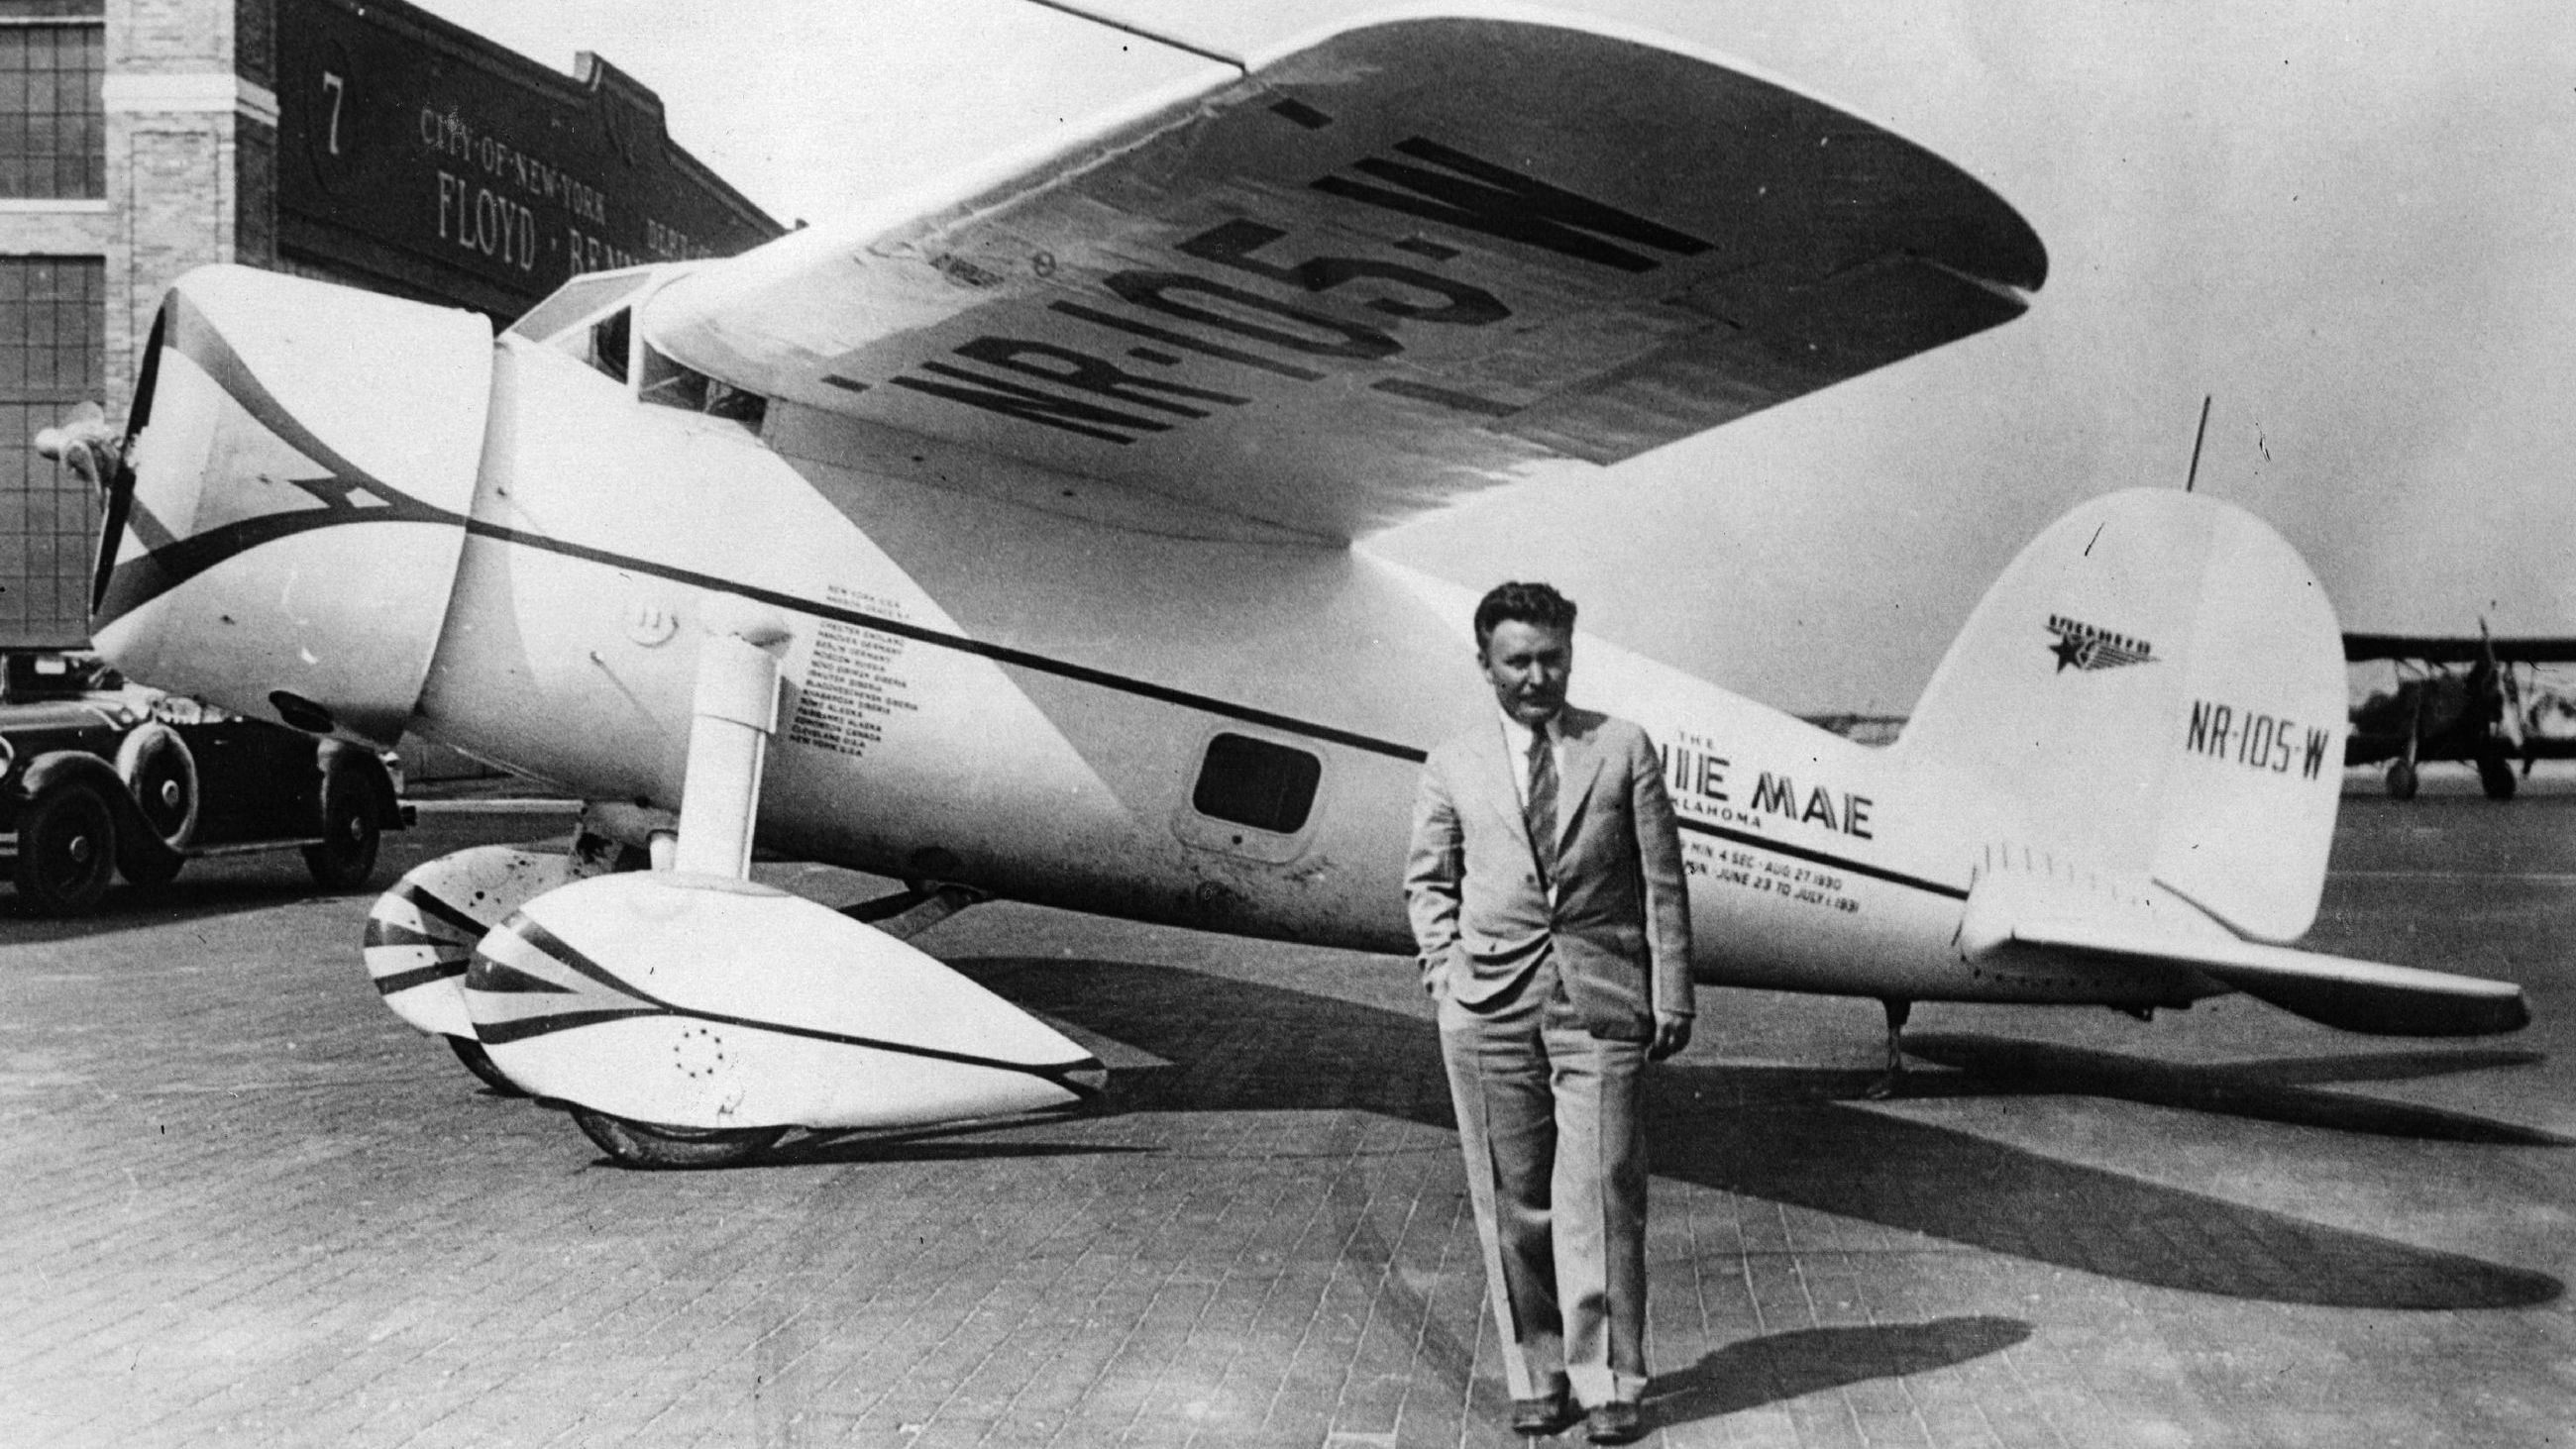 A black and white photo of Wiley Post standing near an aircraft.